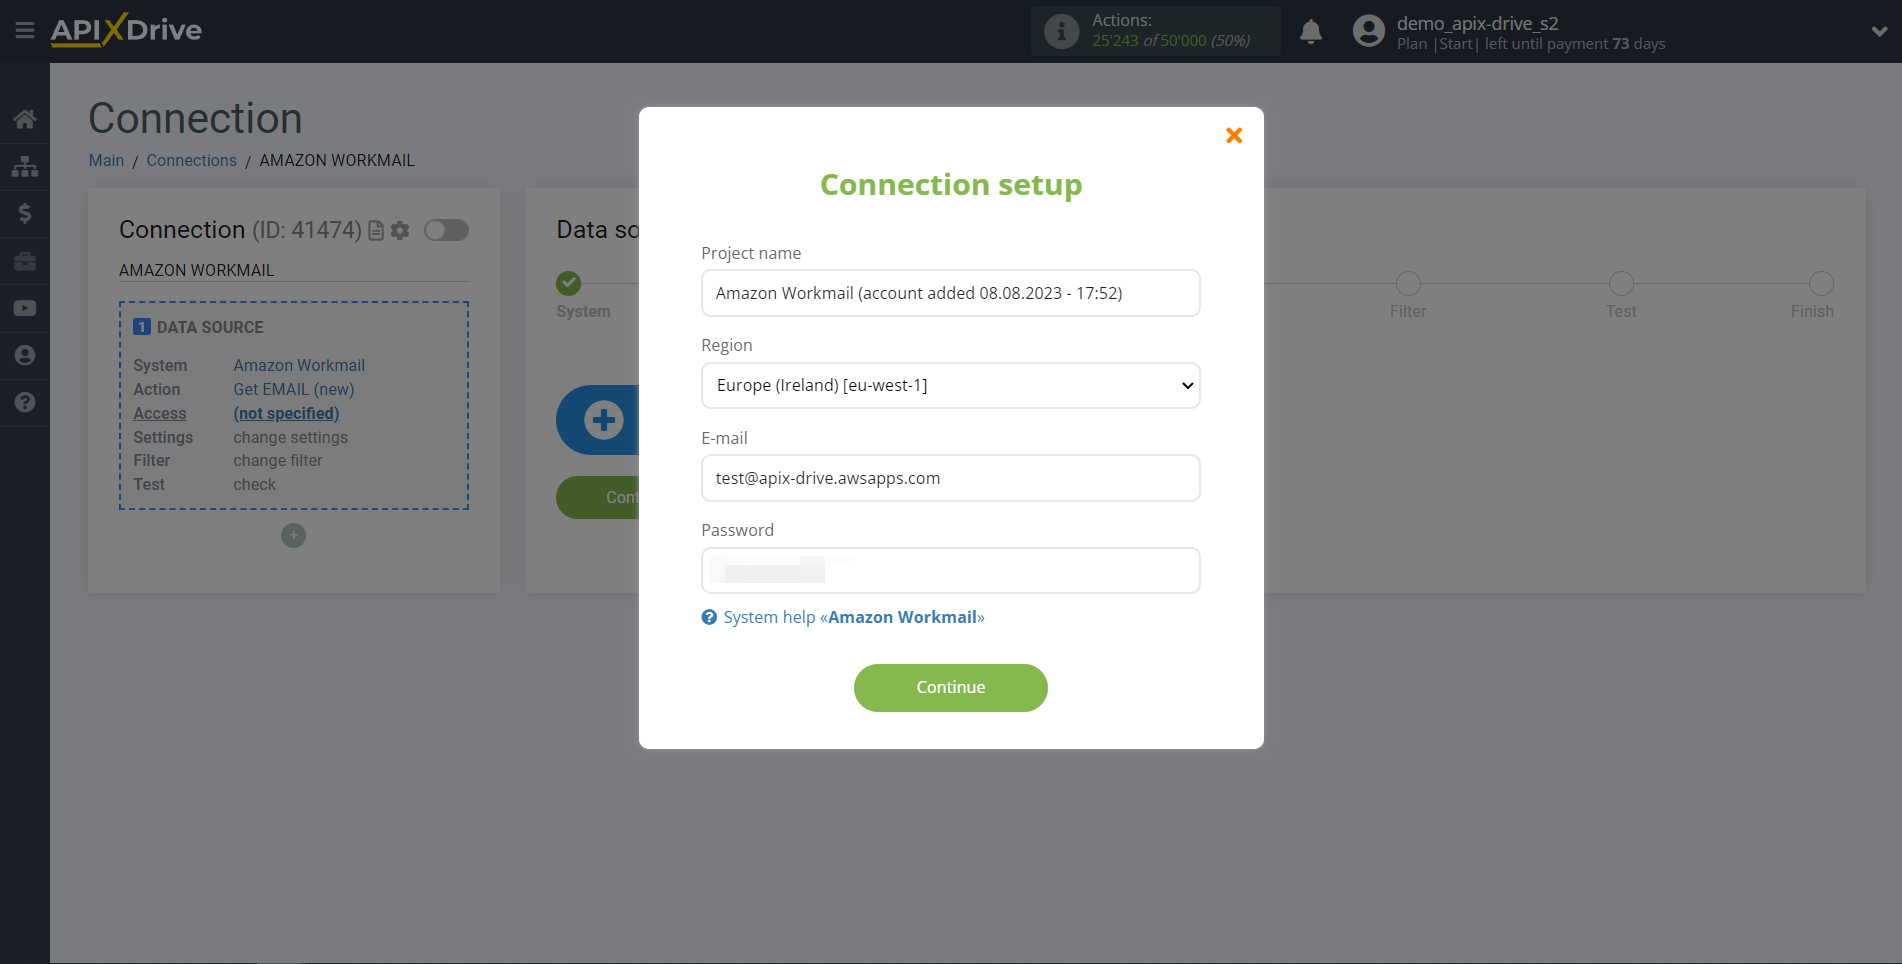 How to Connect Amazon Workmail as Data Source | Connection setup